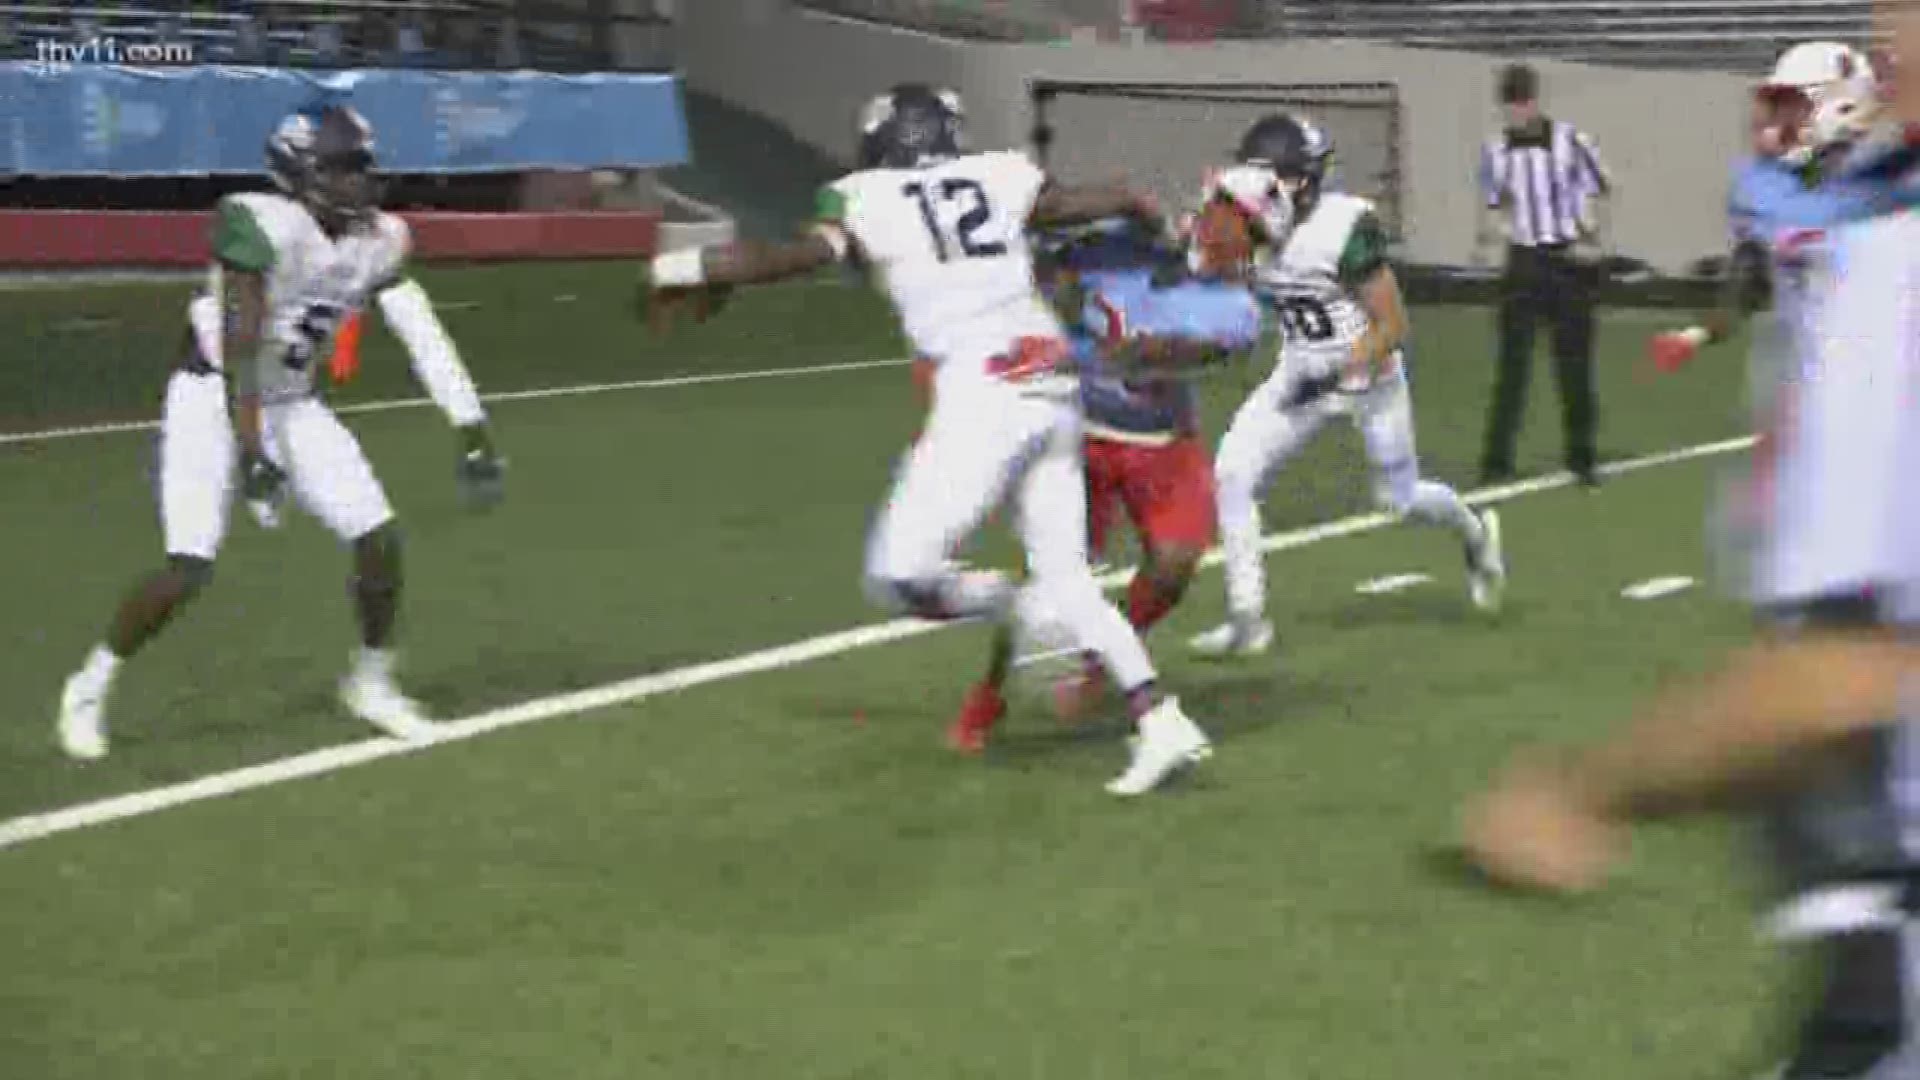 Congrats to Little Rock Christian for winning Yarnell's Sweetest play of week 7!